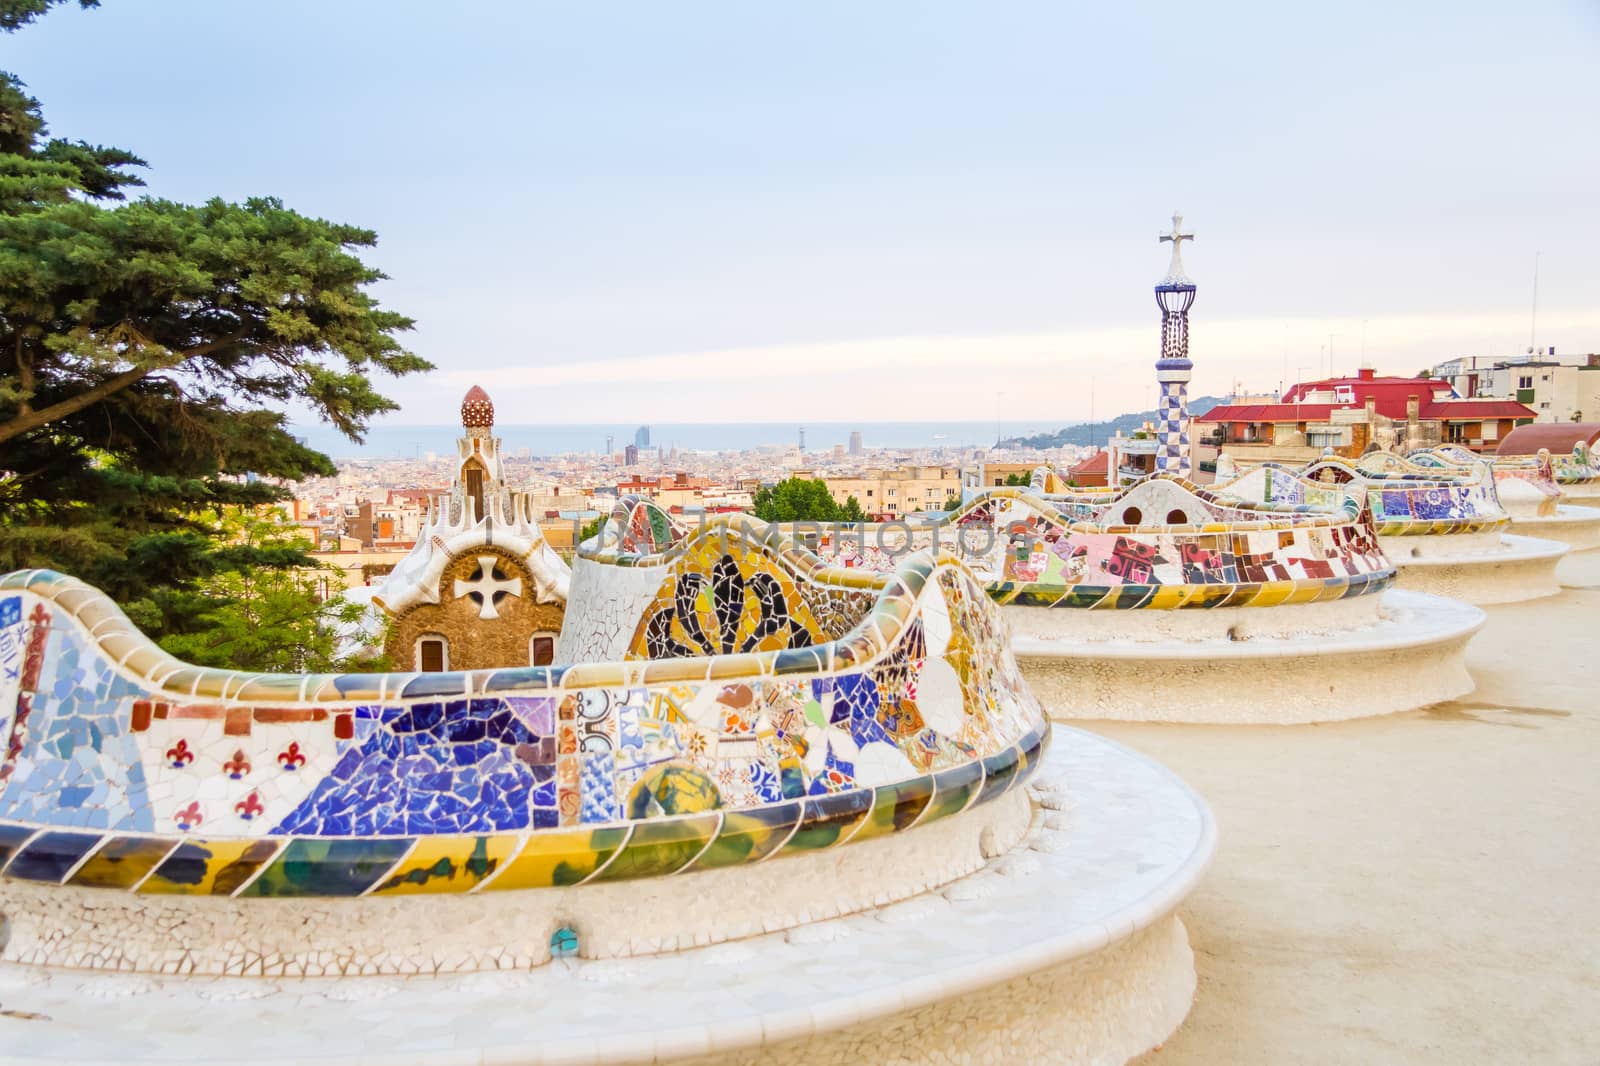 Colorful mosaic bench of park Guell, designed by Gaudi, in Barce by doble.d